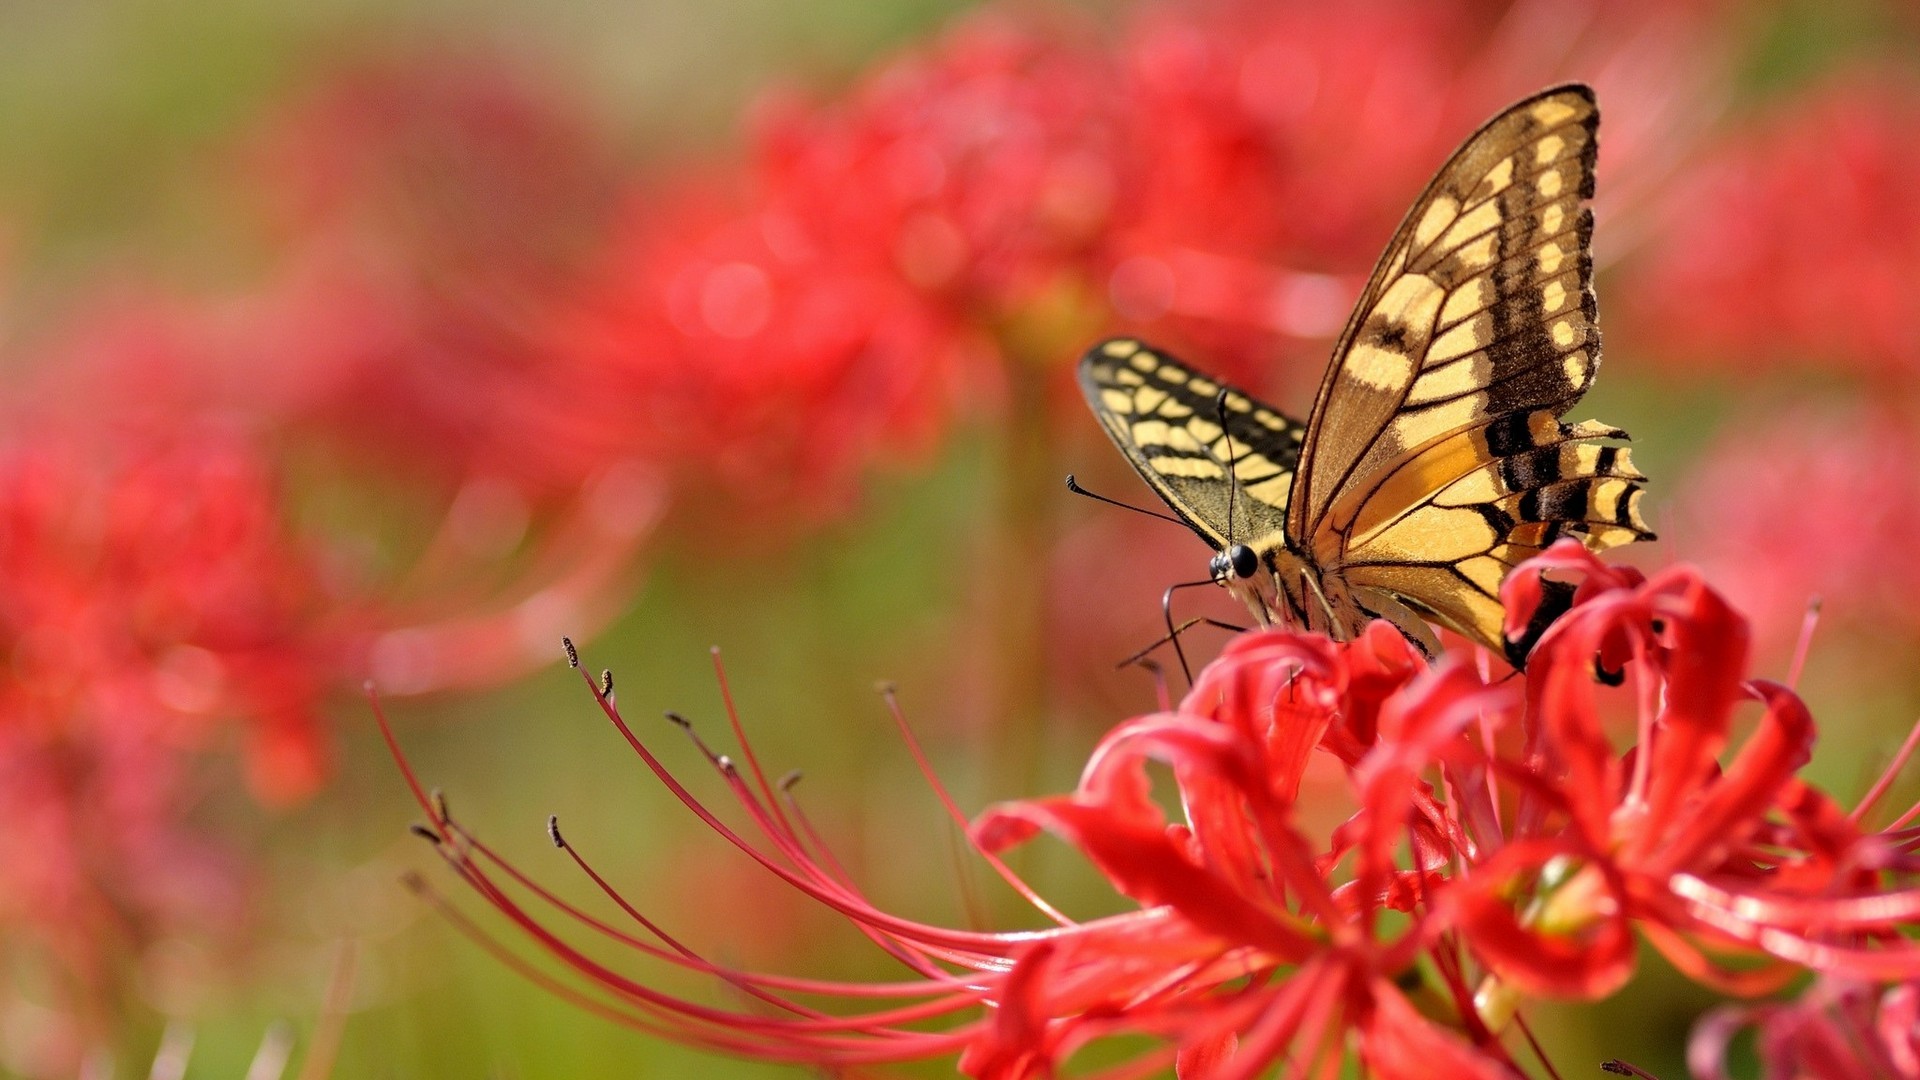 Wallpaper HD Butterfly Pictures 1920x1080